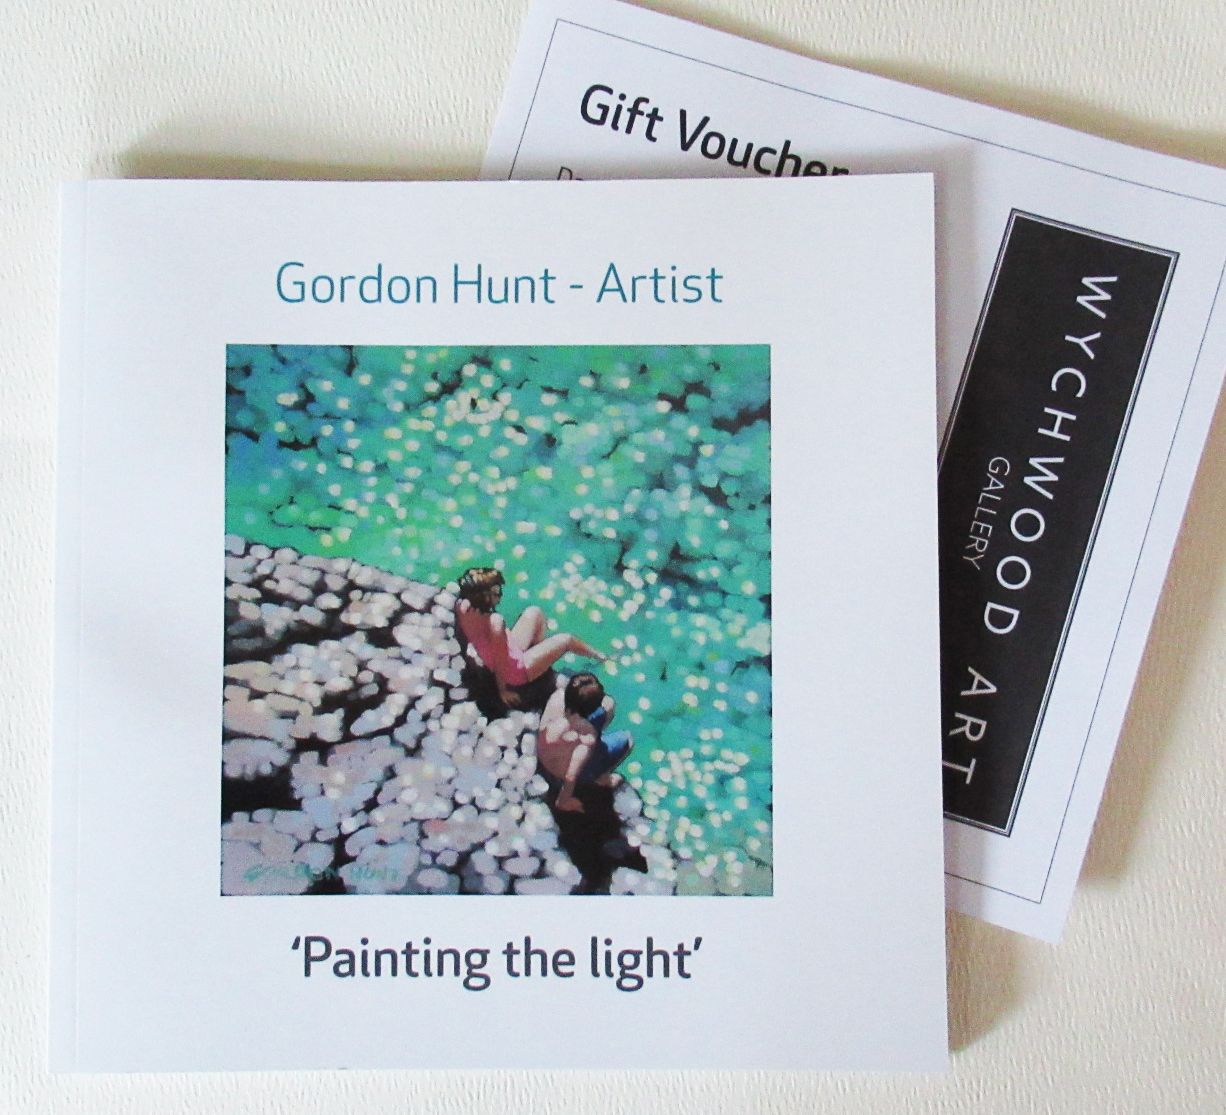 Painting Gift Voucher by Gordon Hunt